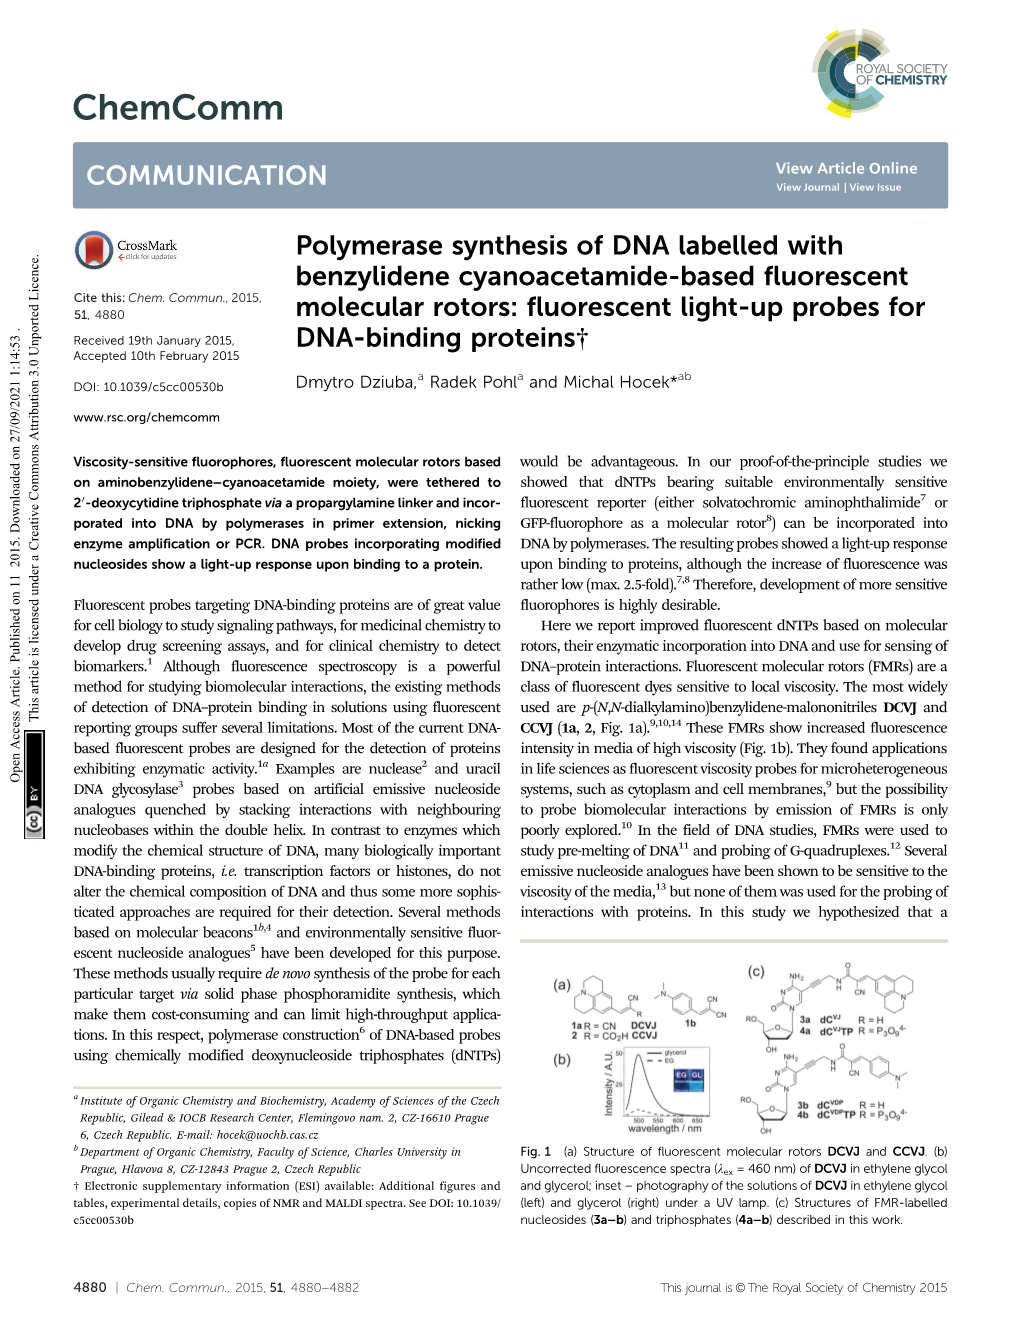 Polymerase Synthesis of DNA Labelled with Benzylidene Cyanoacetamide-Based Fluorescent Cite This: Chem